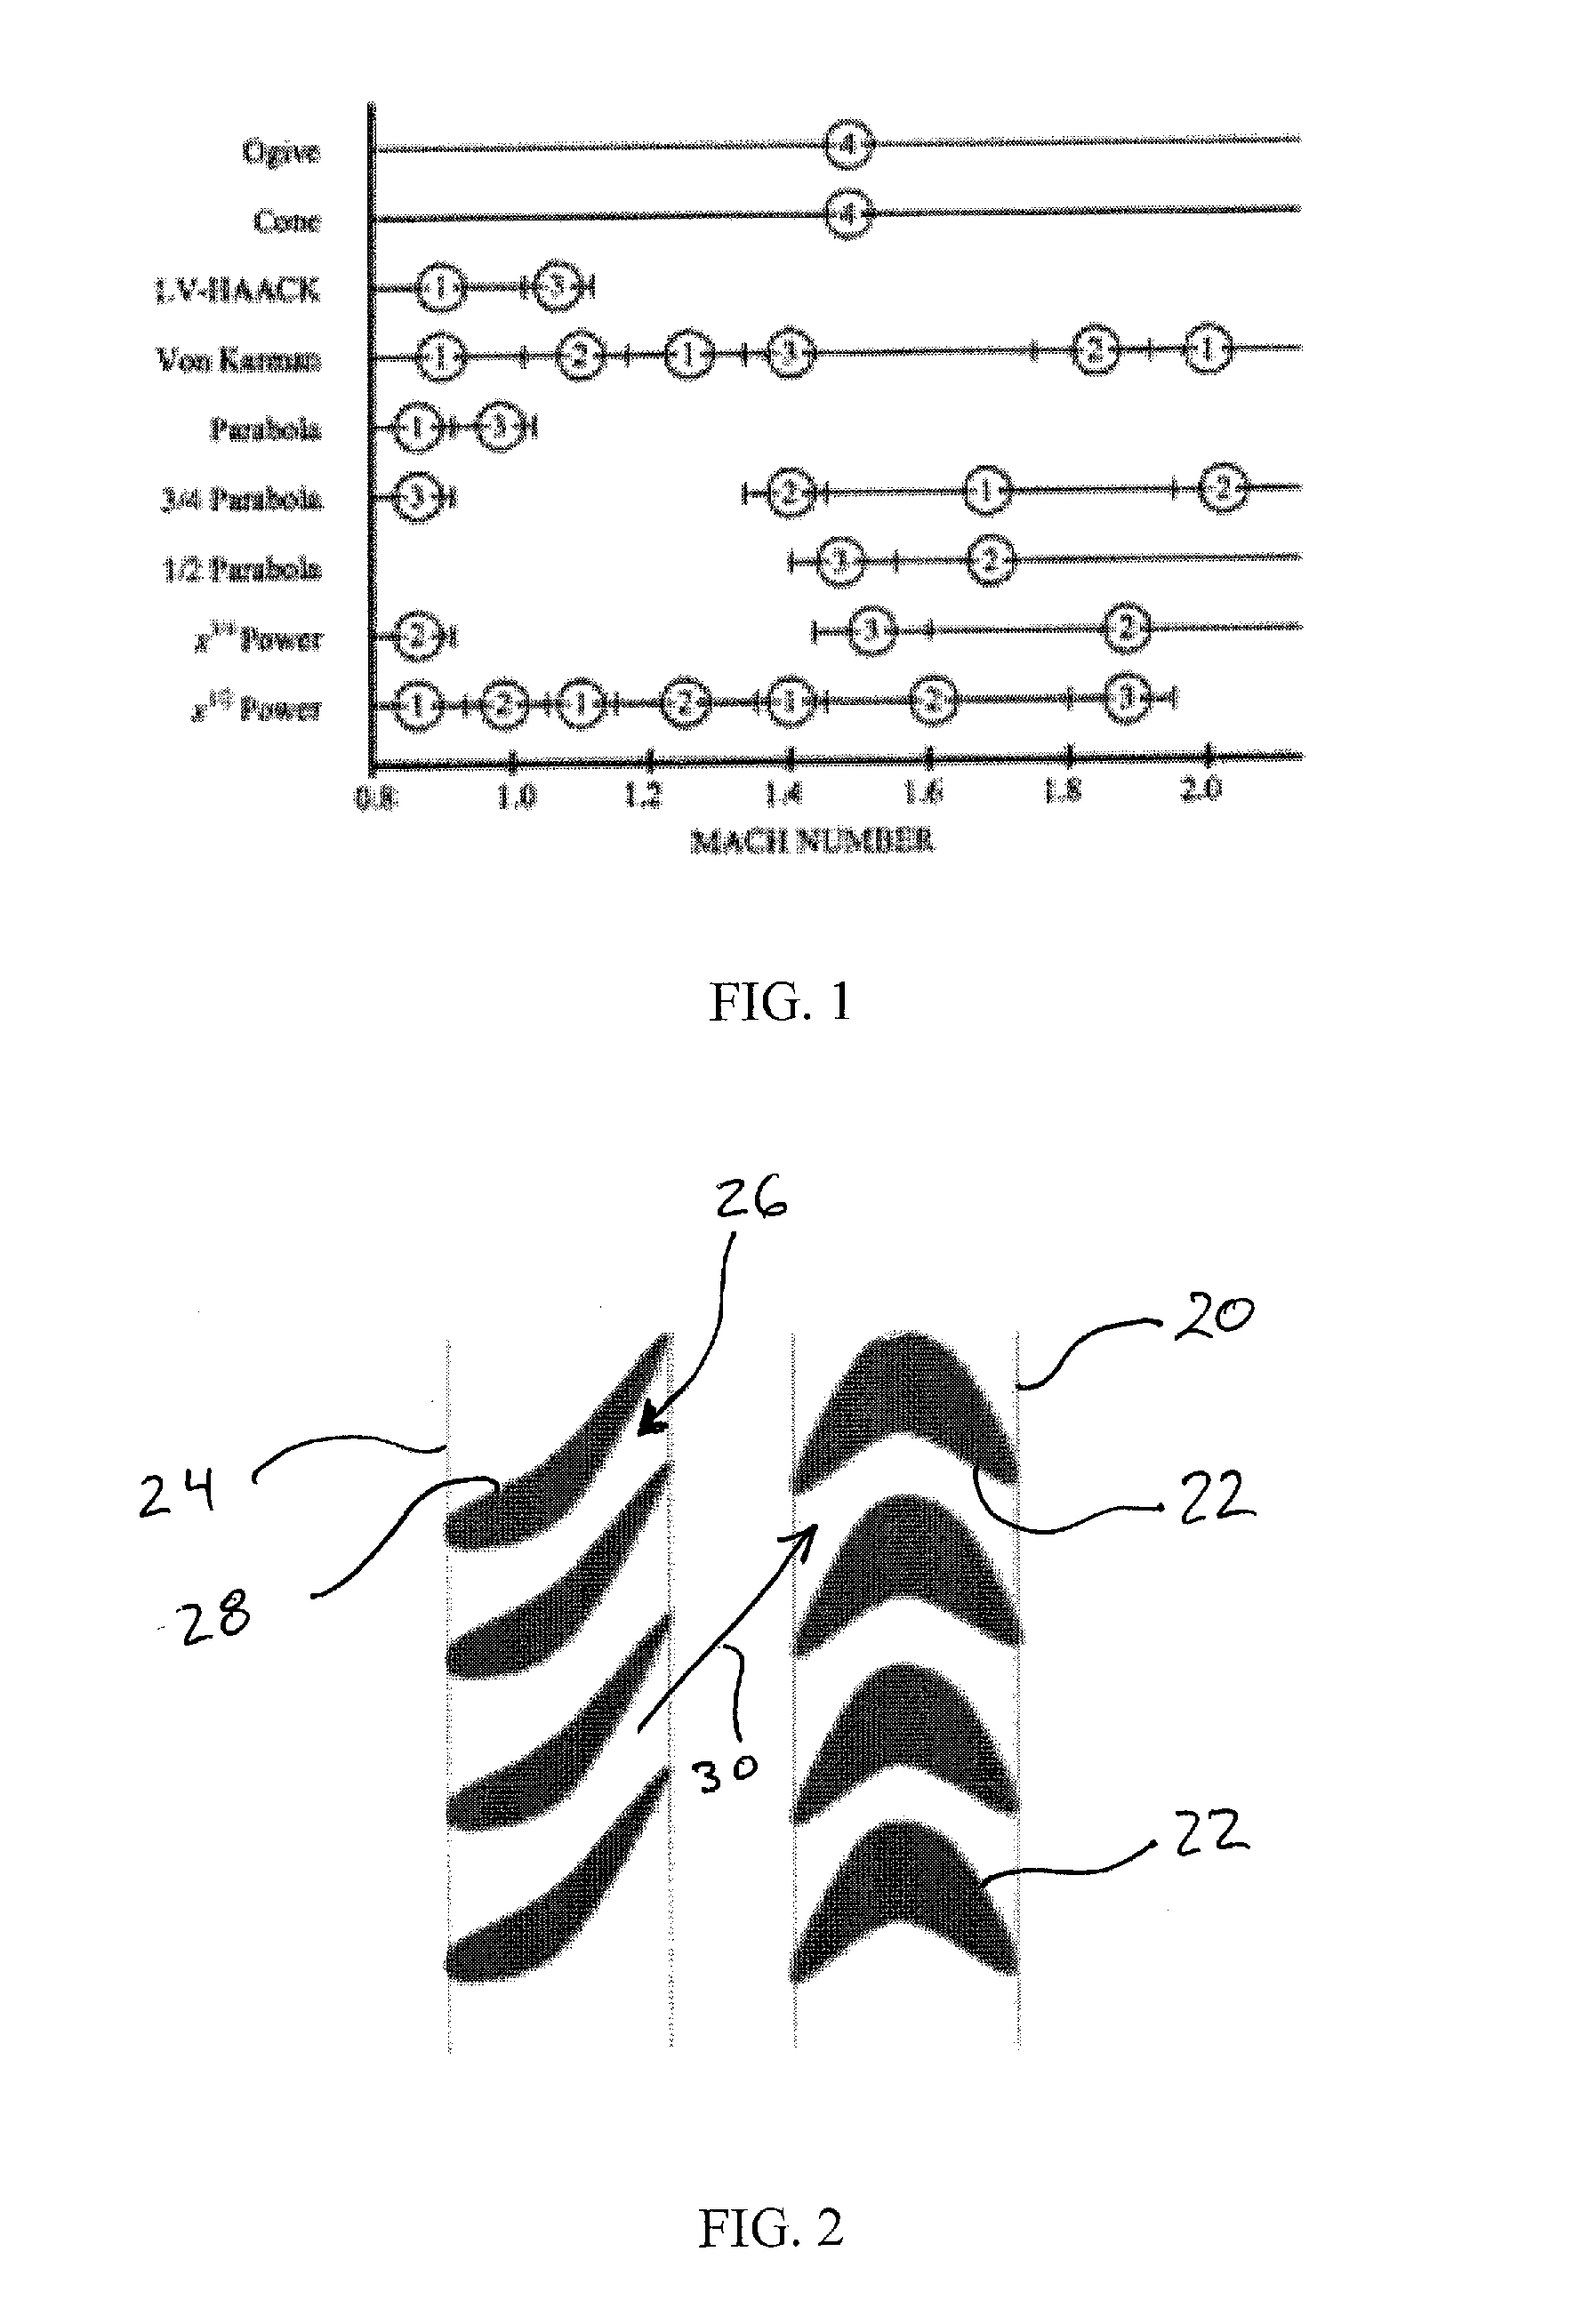 High Spin Projectile Apparatus for Smooth Bore Barrels